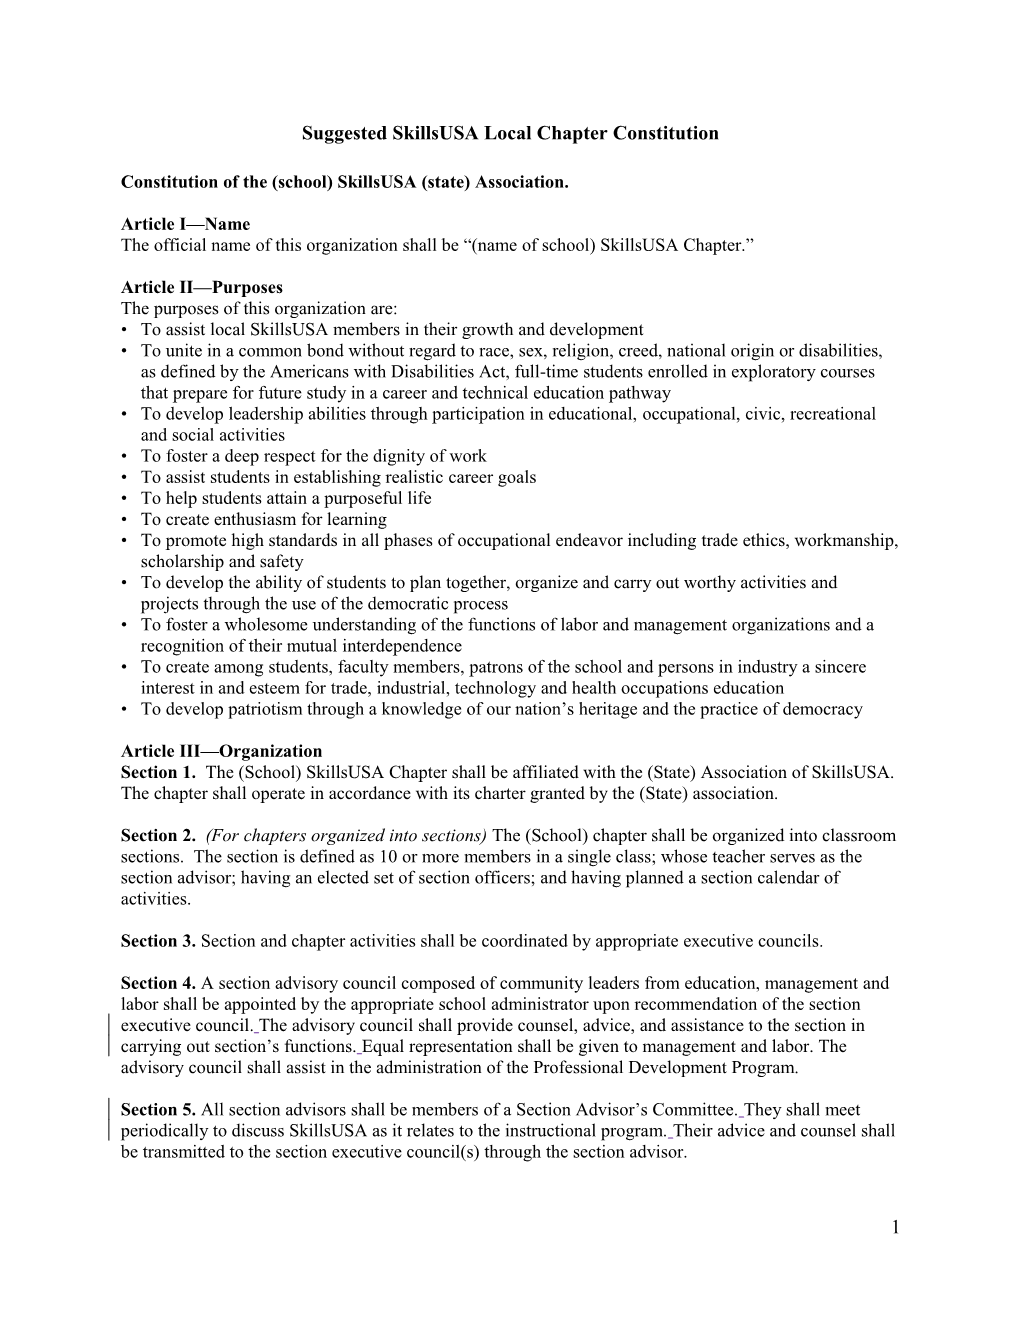 Suggested Skillsusa Local Chapter Constitution